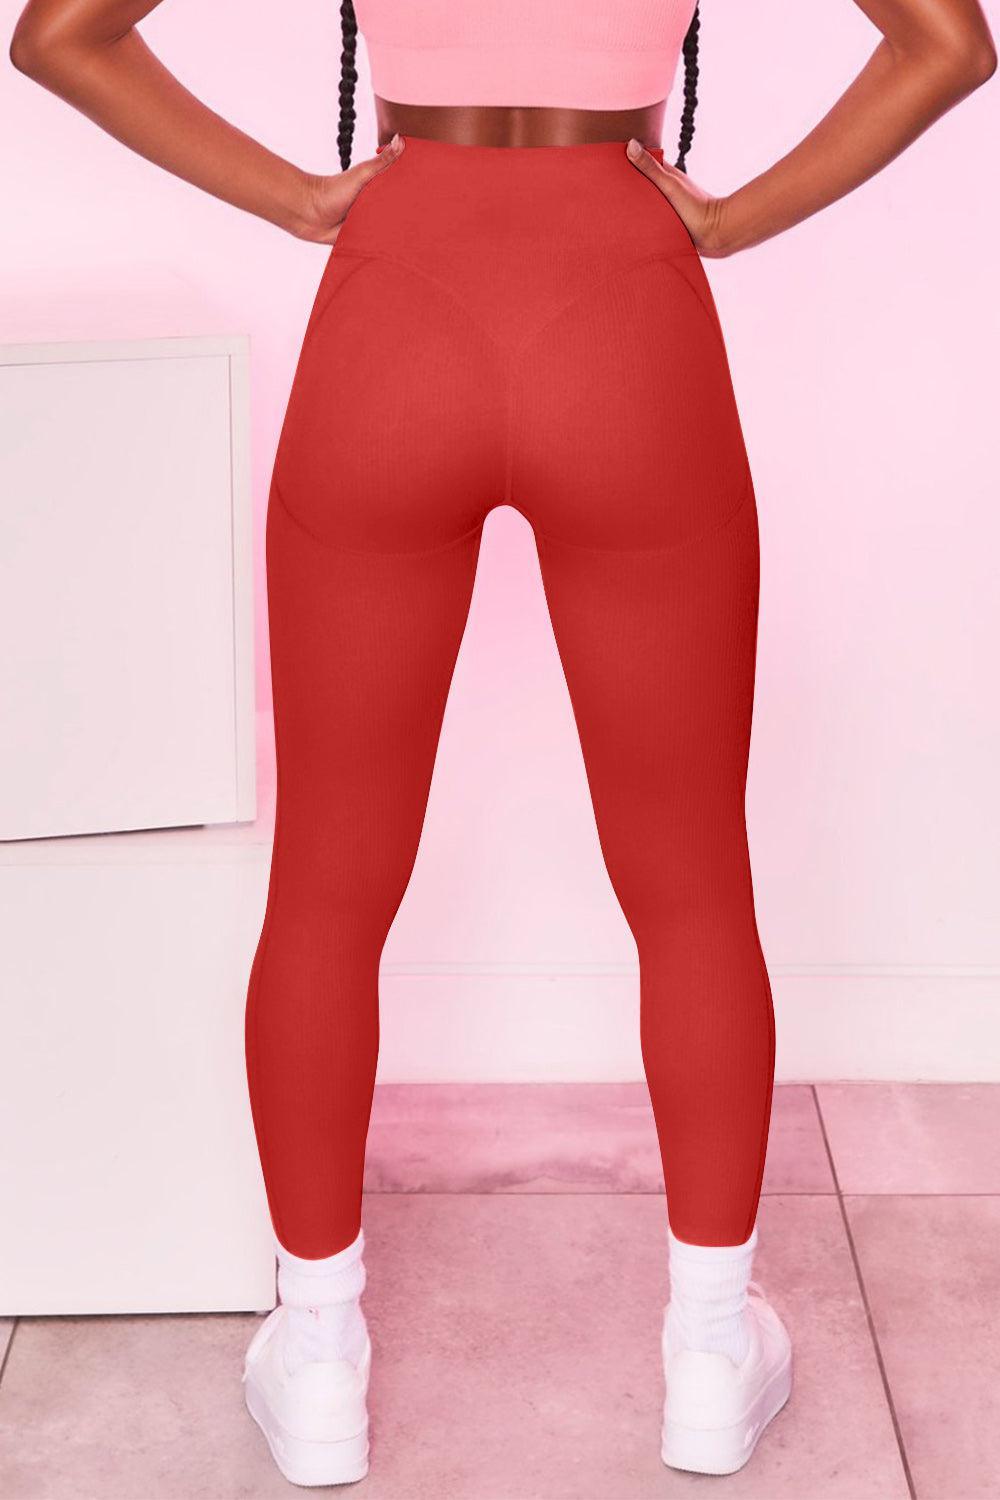 a woman in a pink top and red leggings